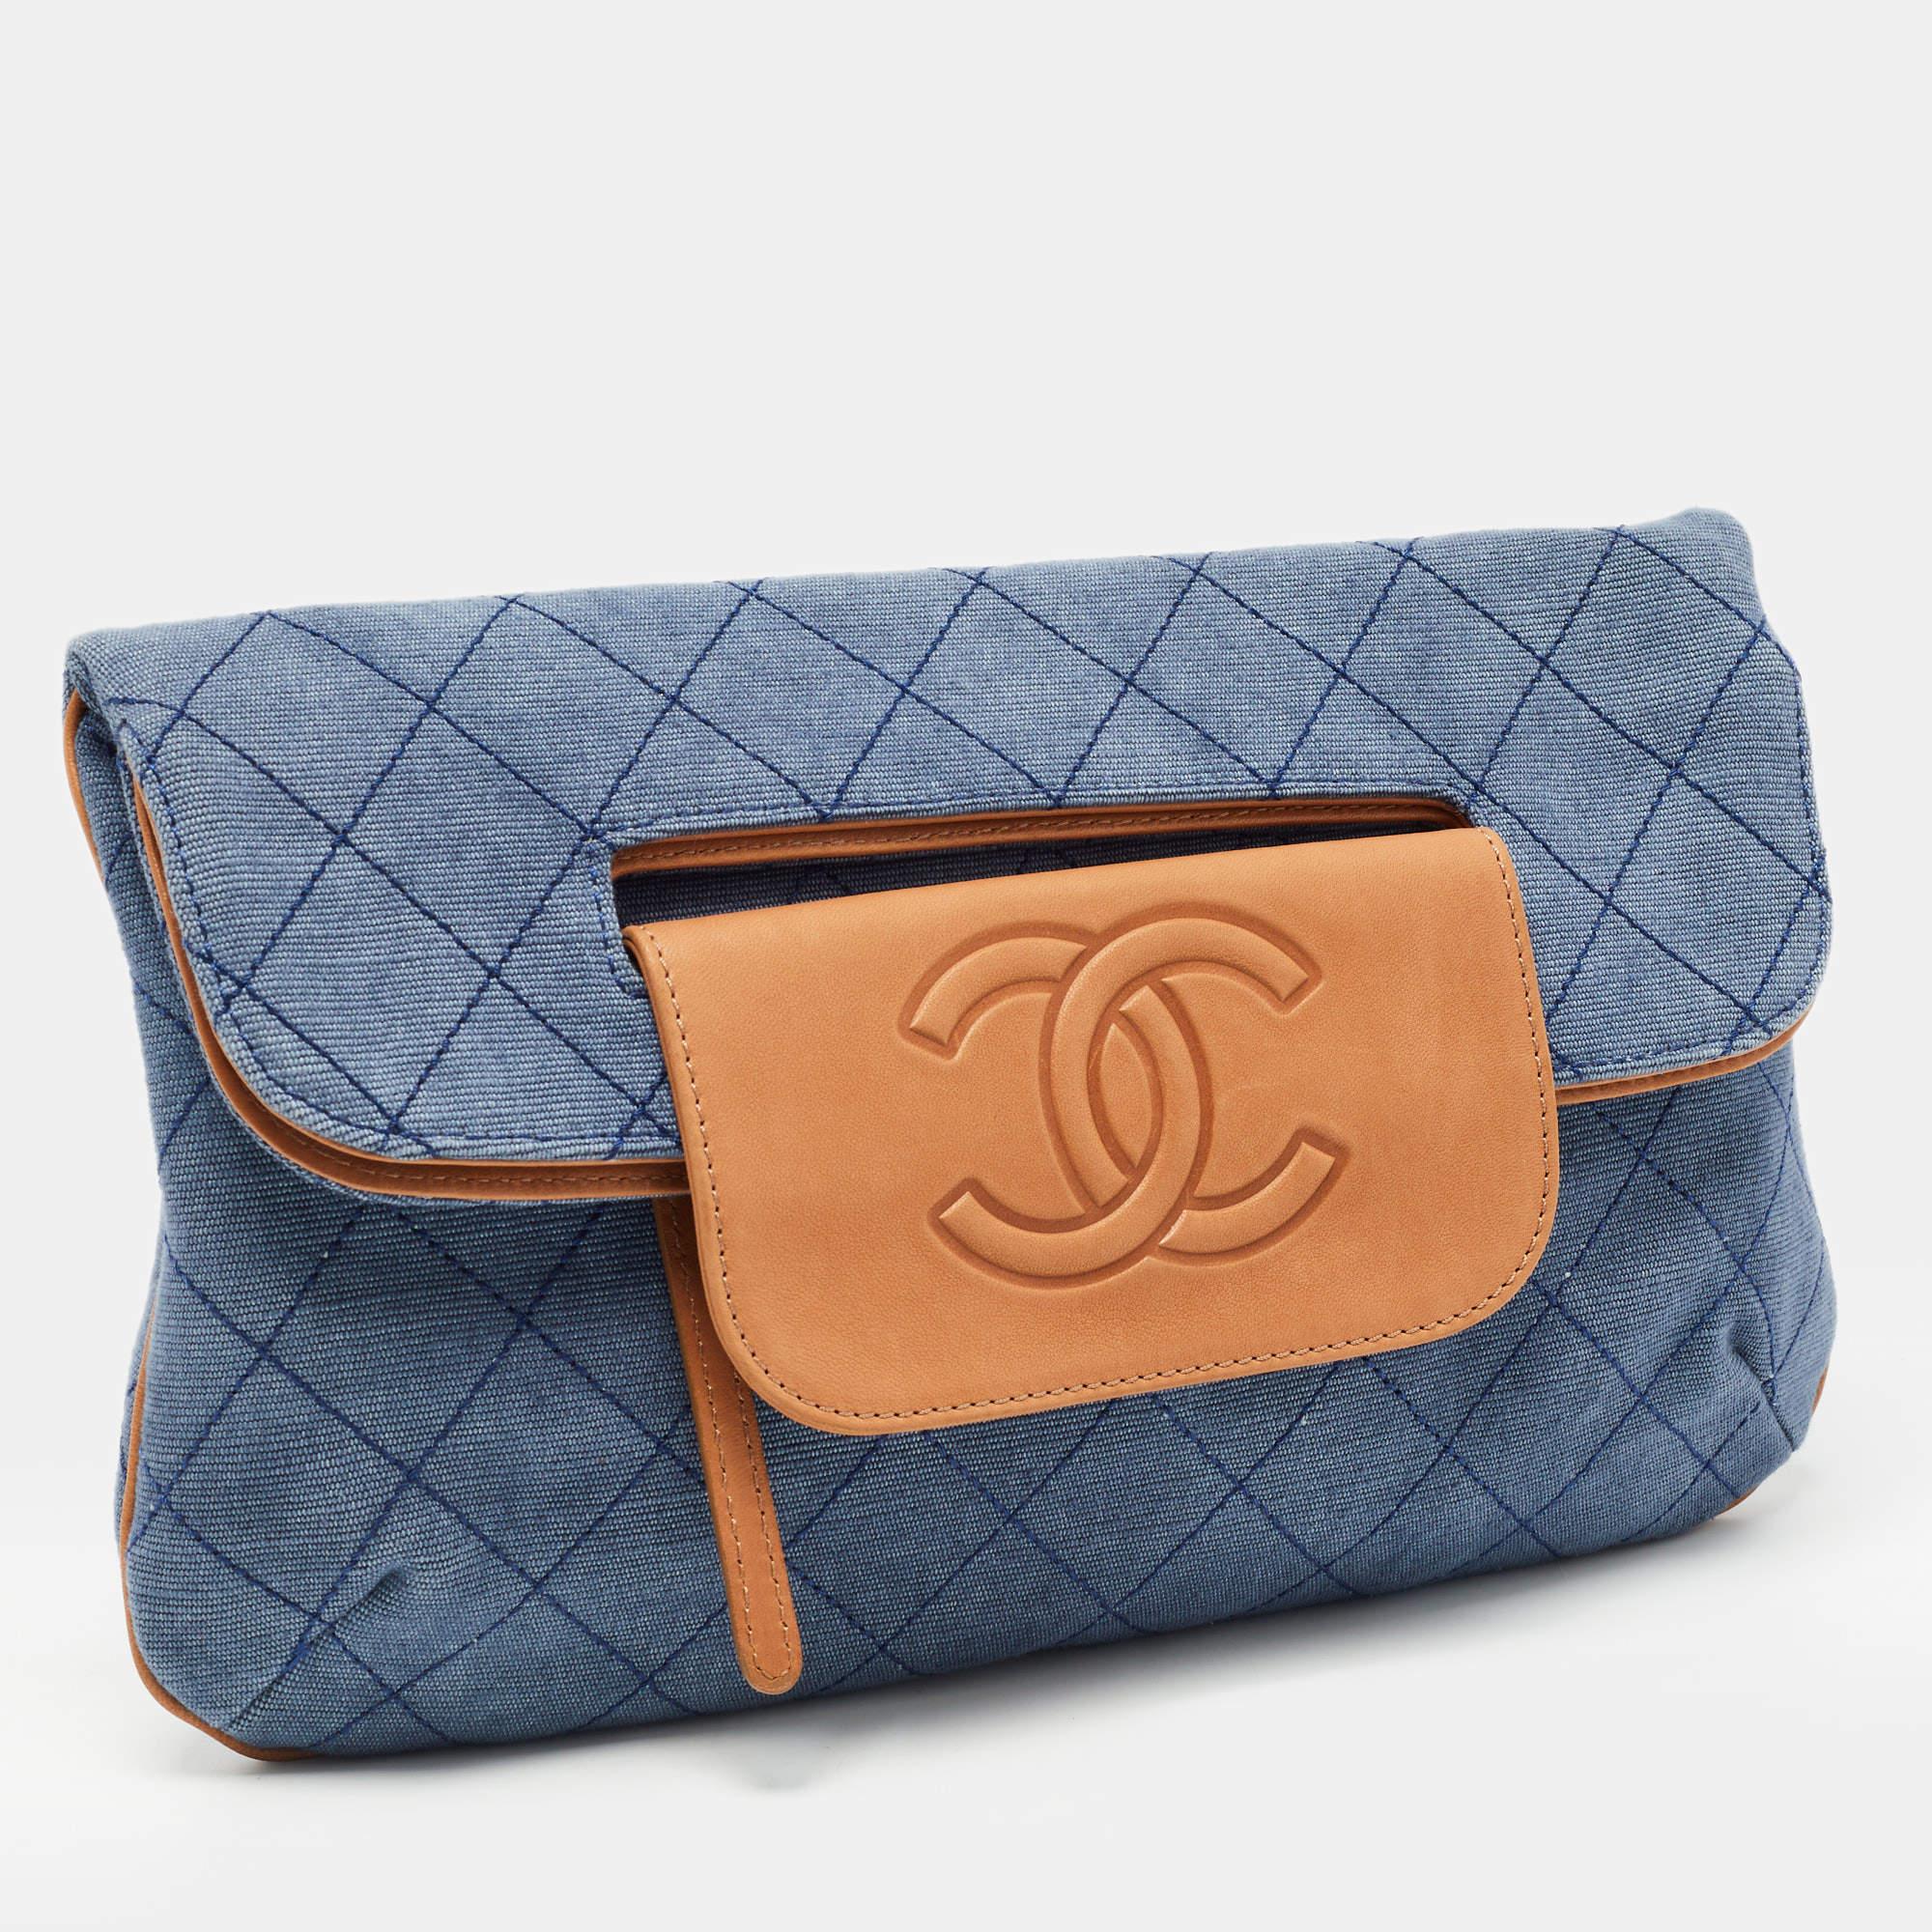 Women's Chanel Blue/Tan Quilted Denim and Leather CC Flap Clutch